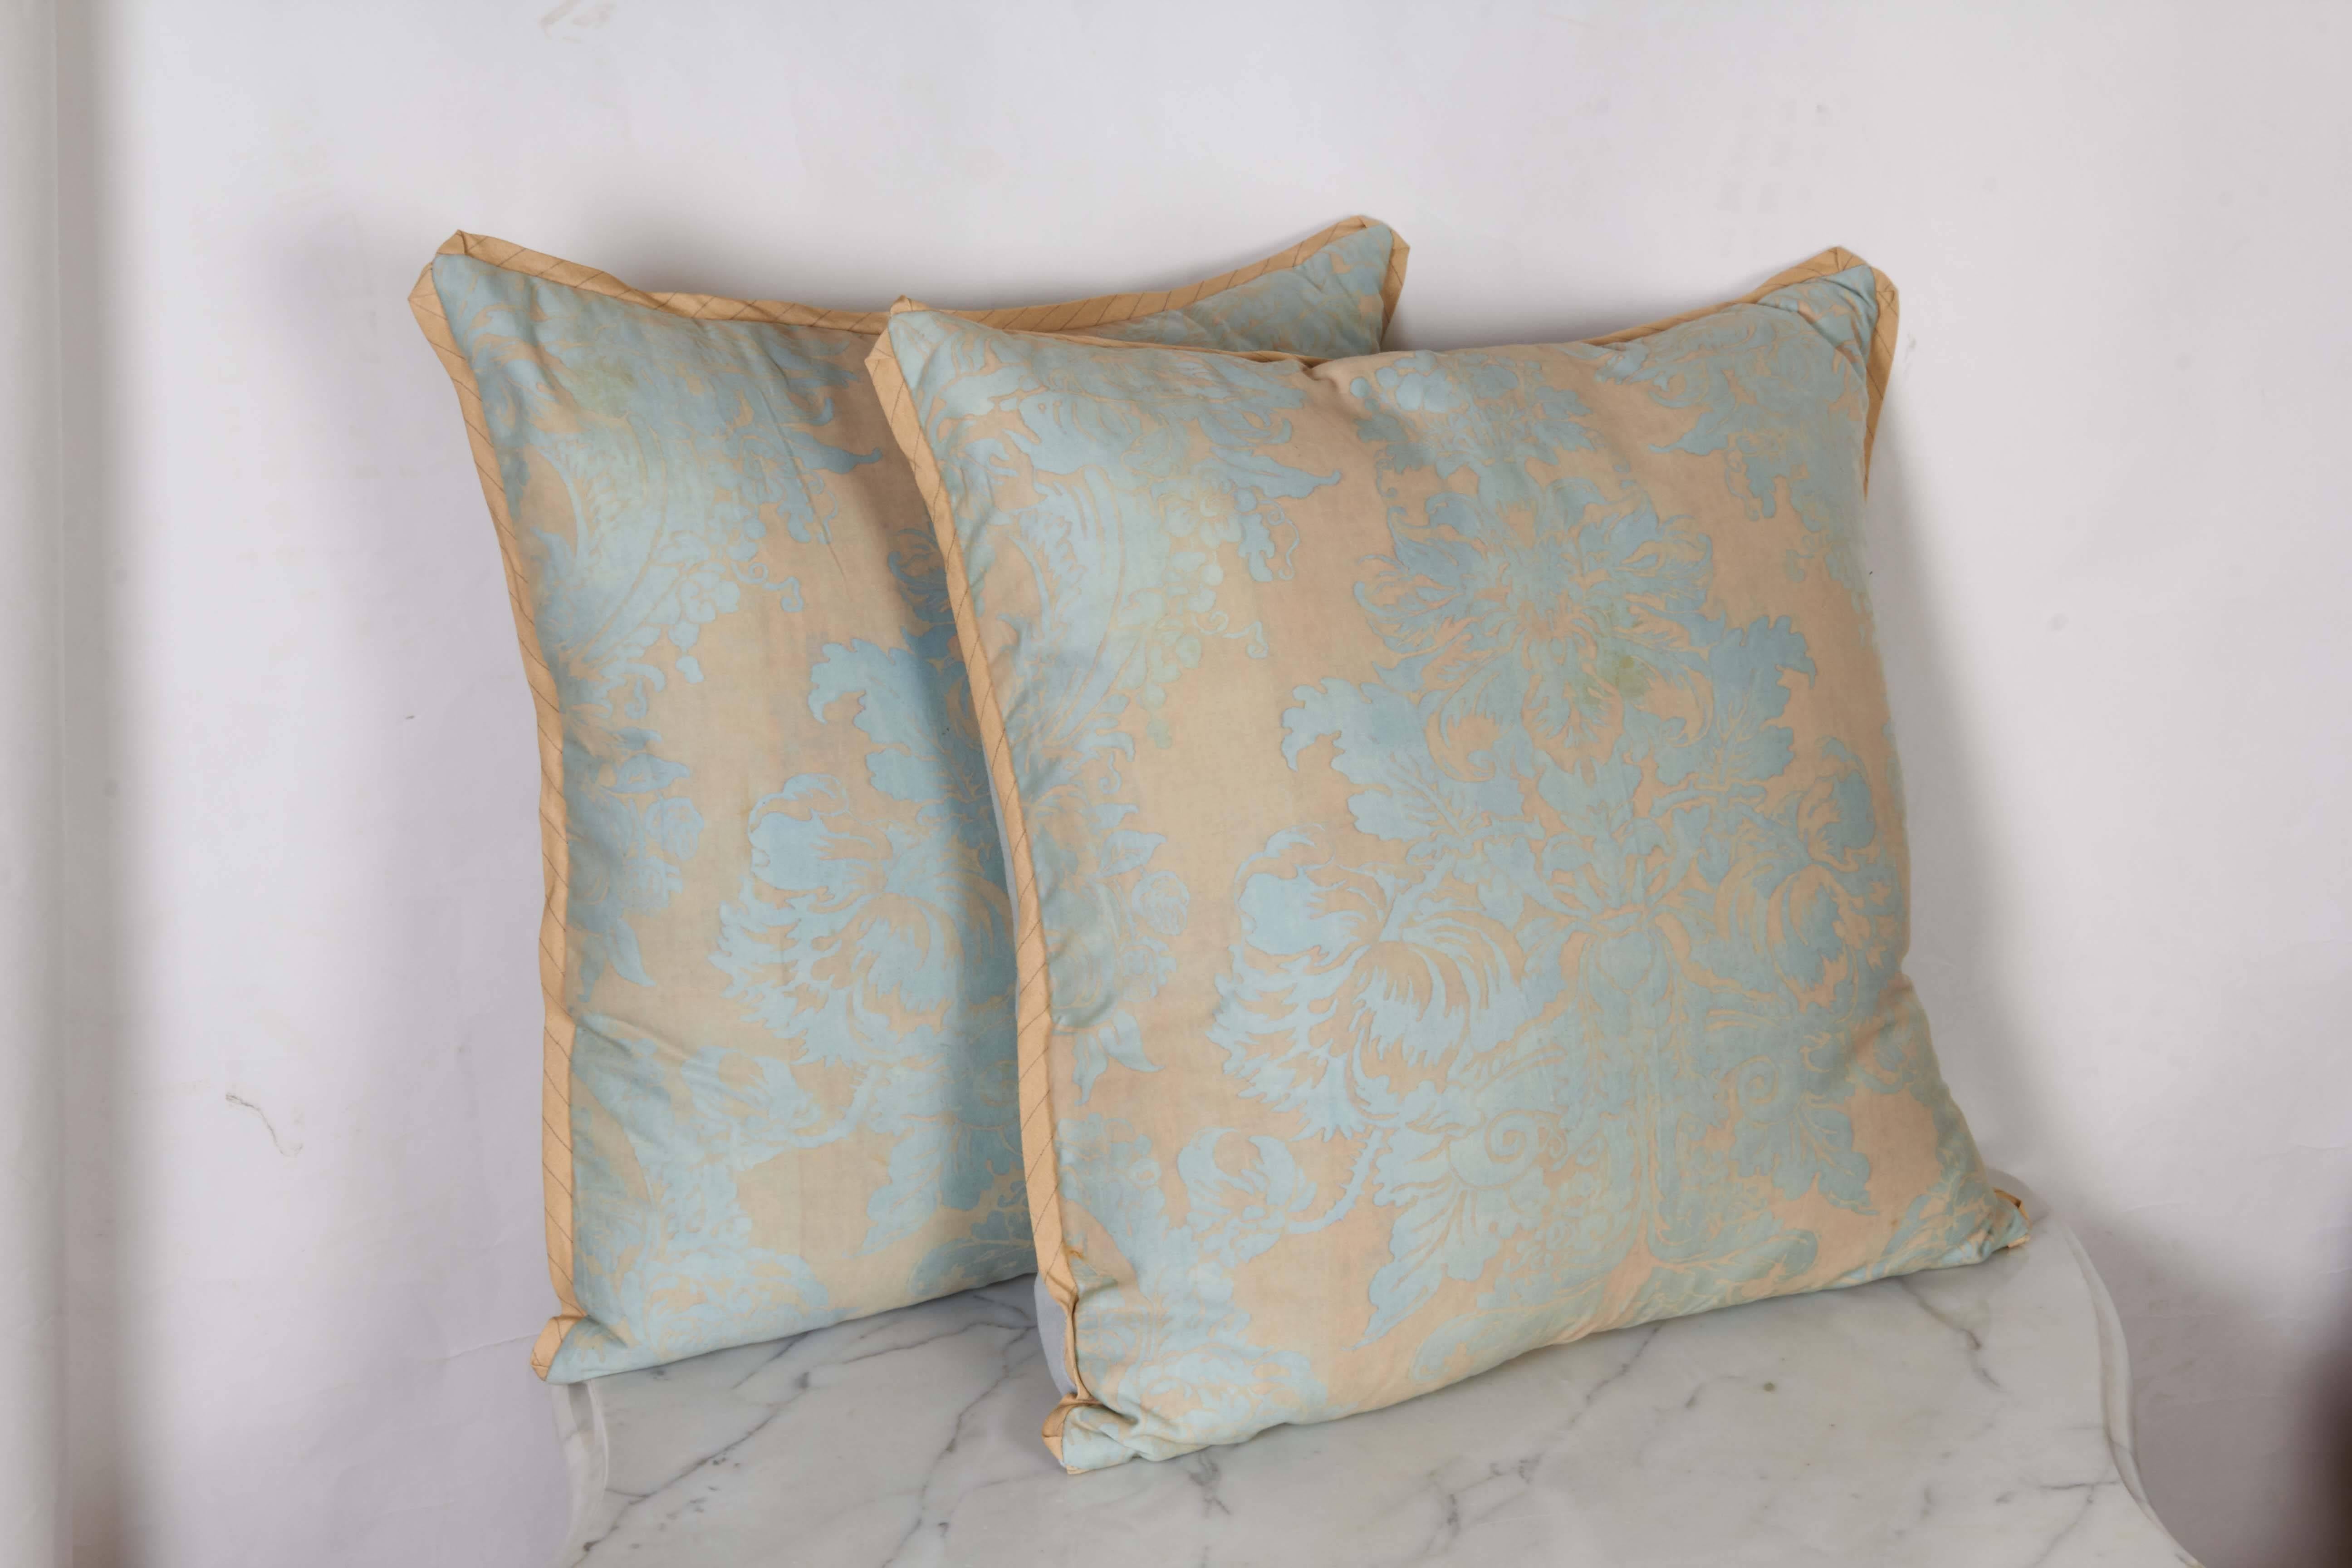 A set of three Fortuny fabric cushion in the Dandolo pattern, three square cushions available, moon light and white color way with Holland and Sherry powder blue cashmere backing fabric, striped silk bias edging, the pattern, inspired by a 17th